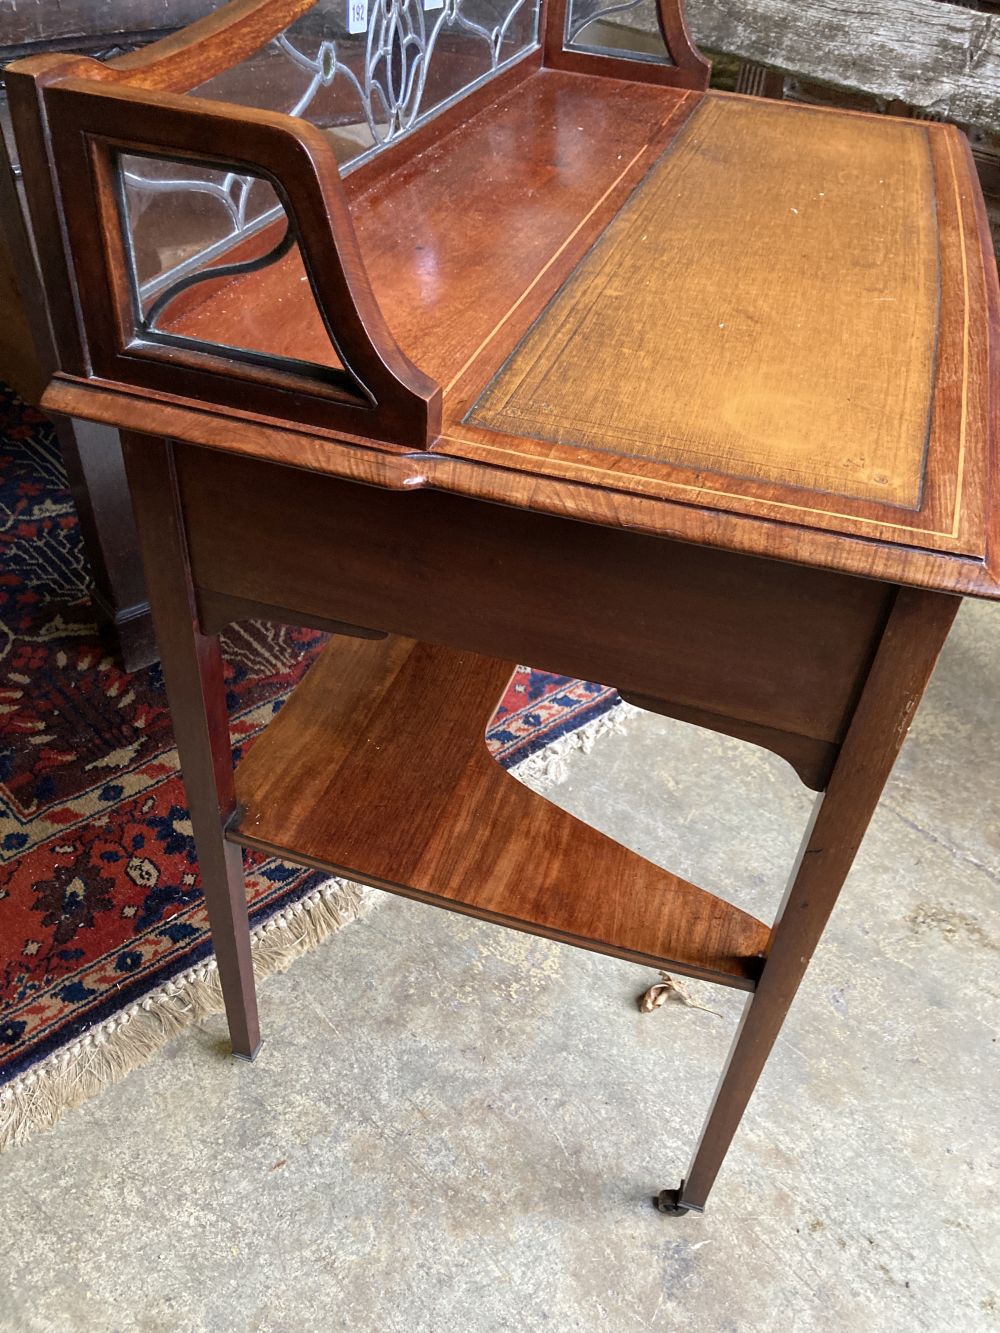 An Edwardian inlaid mahogany side table, the superstructure with an inset stained glass panel, width 95cm, depth 50cm, height 91cm